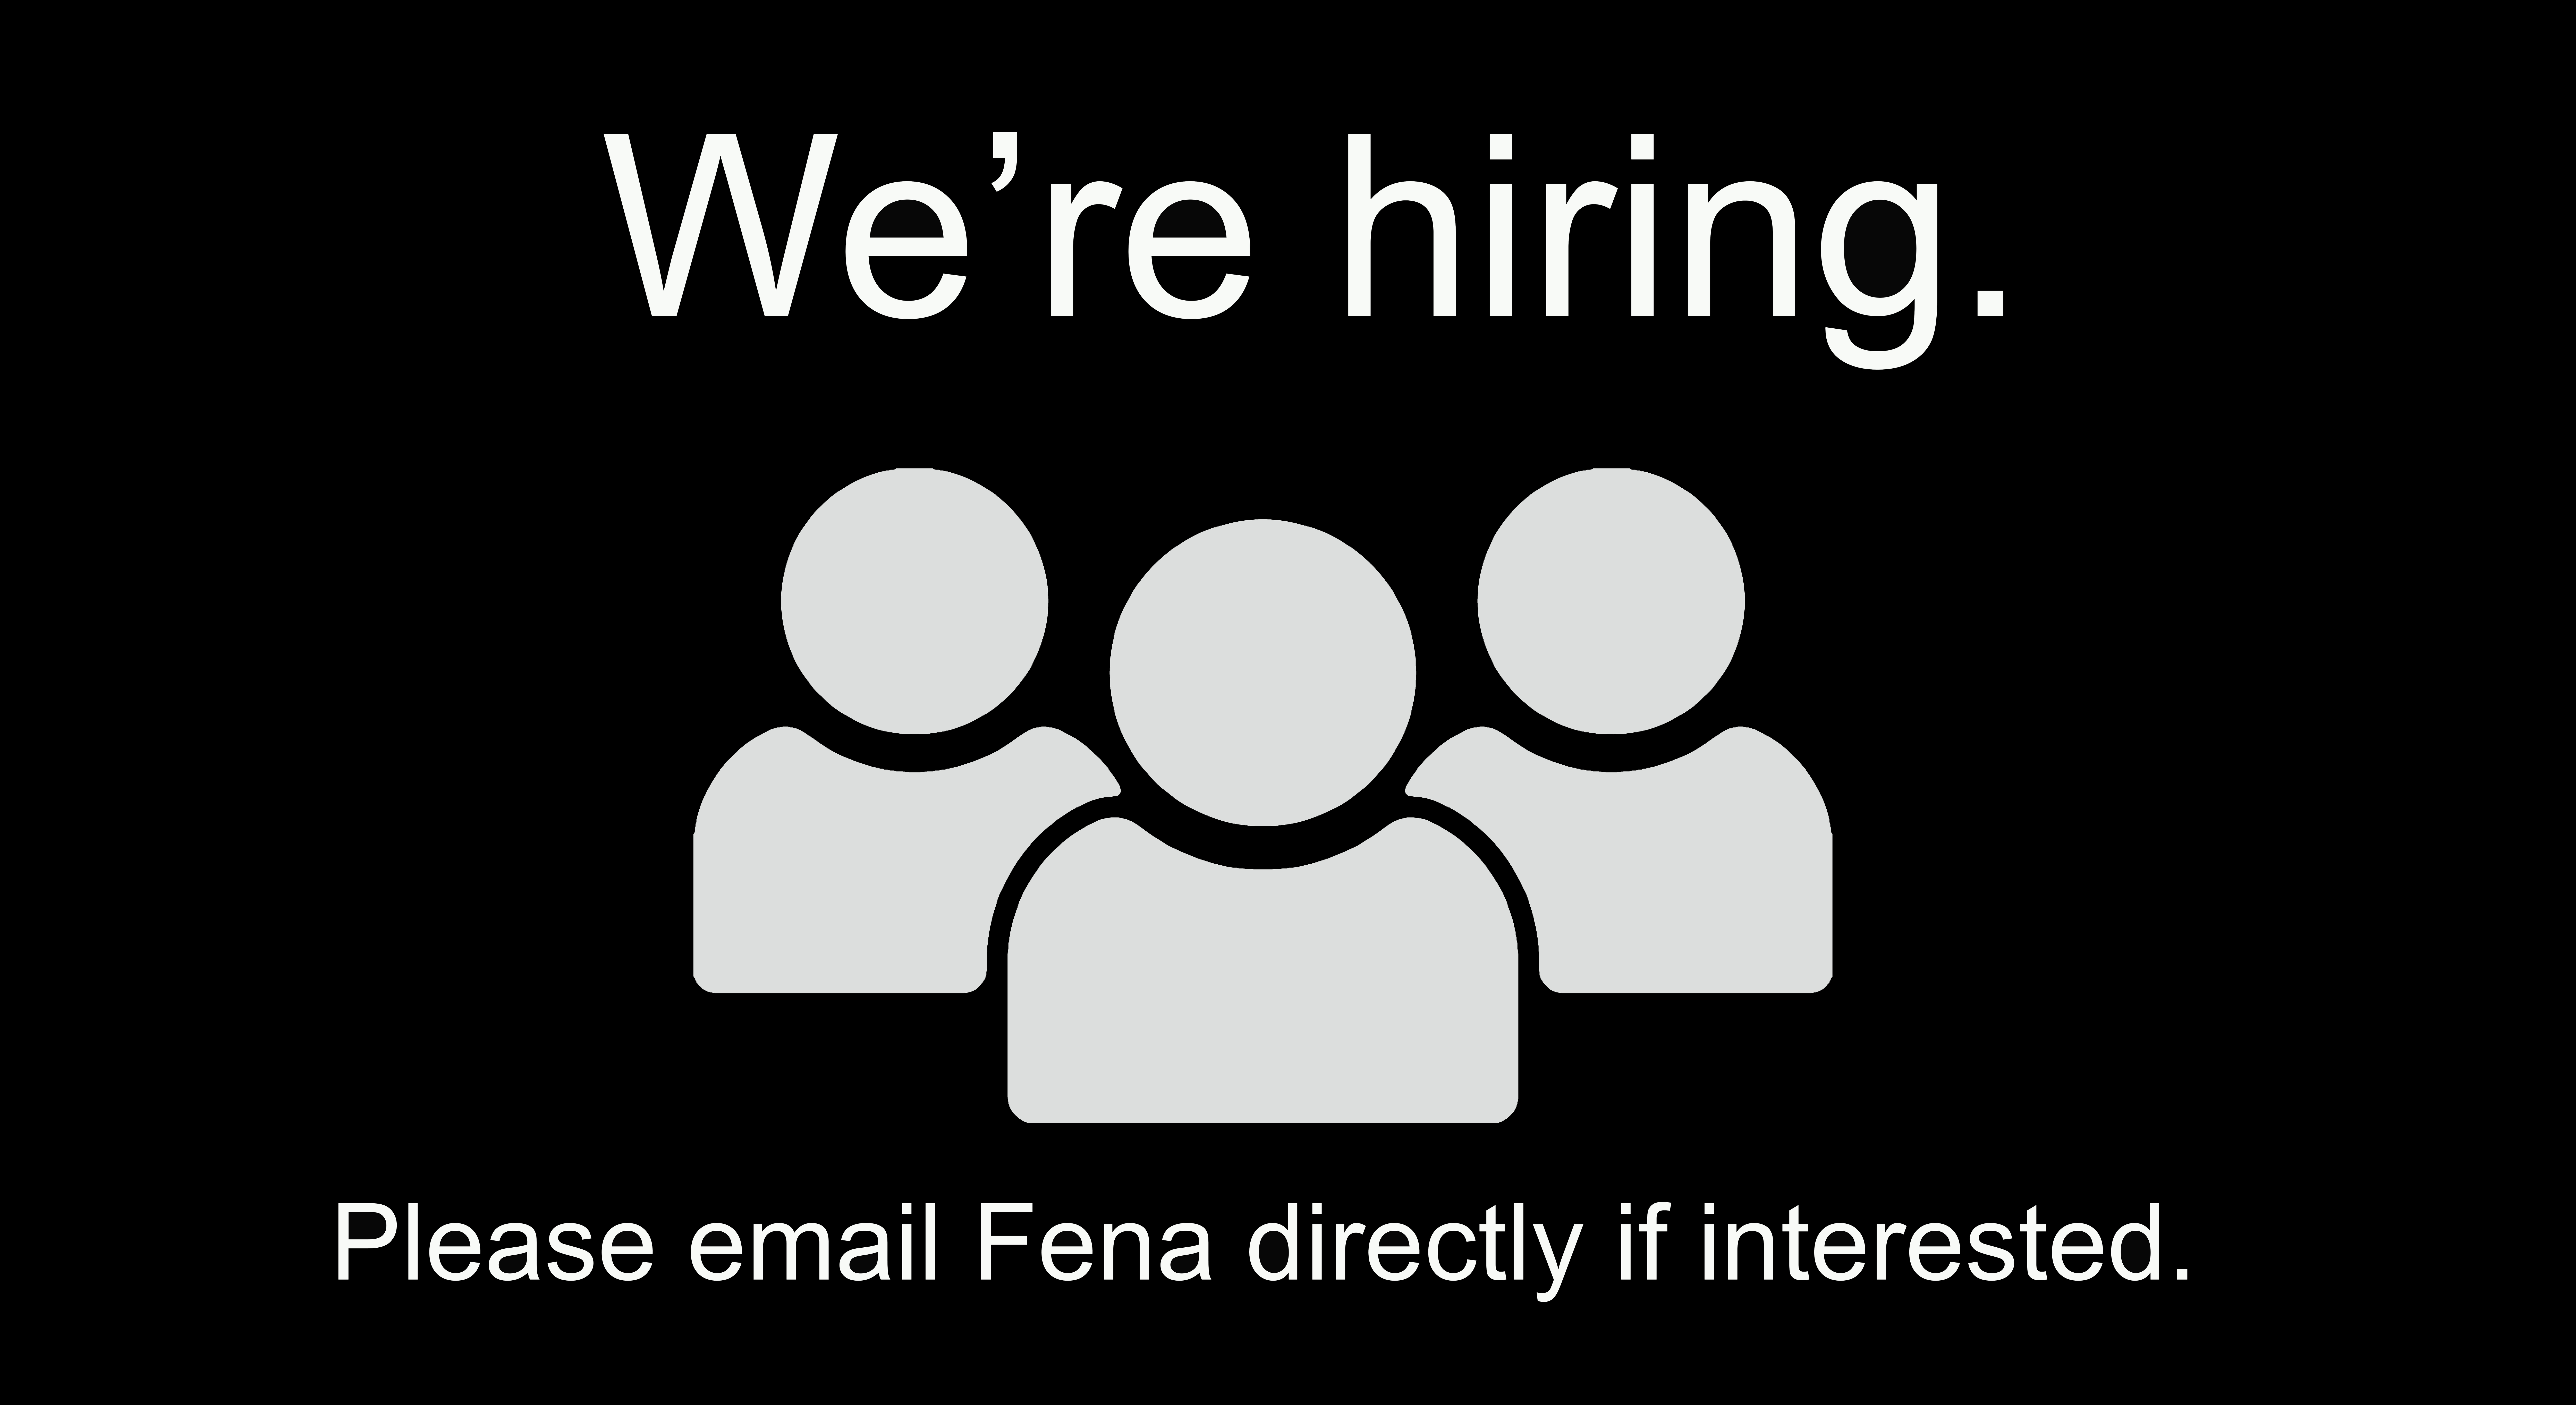 We are hiring - contact Fena directly if interested